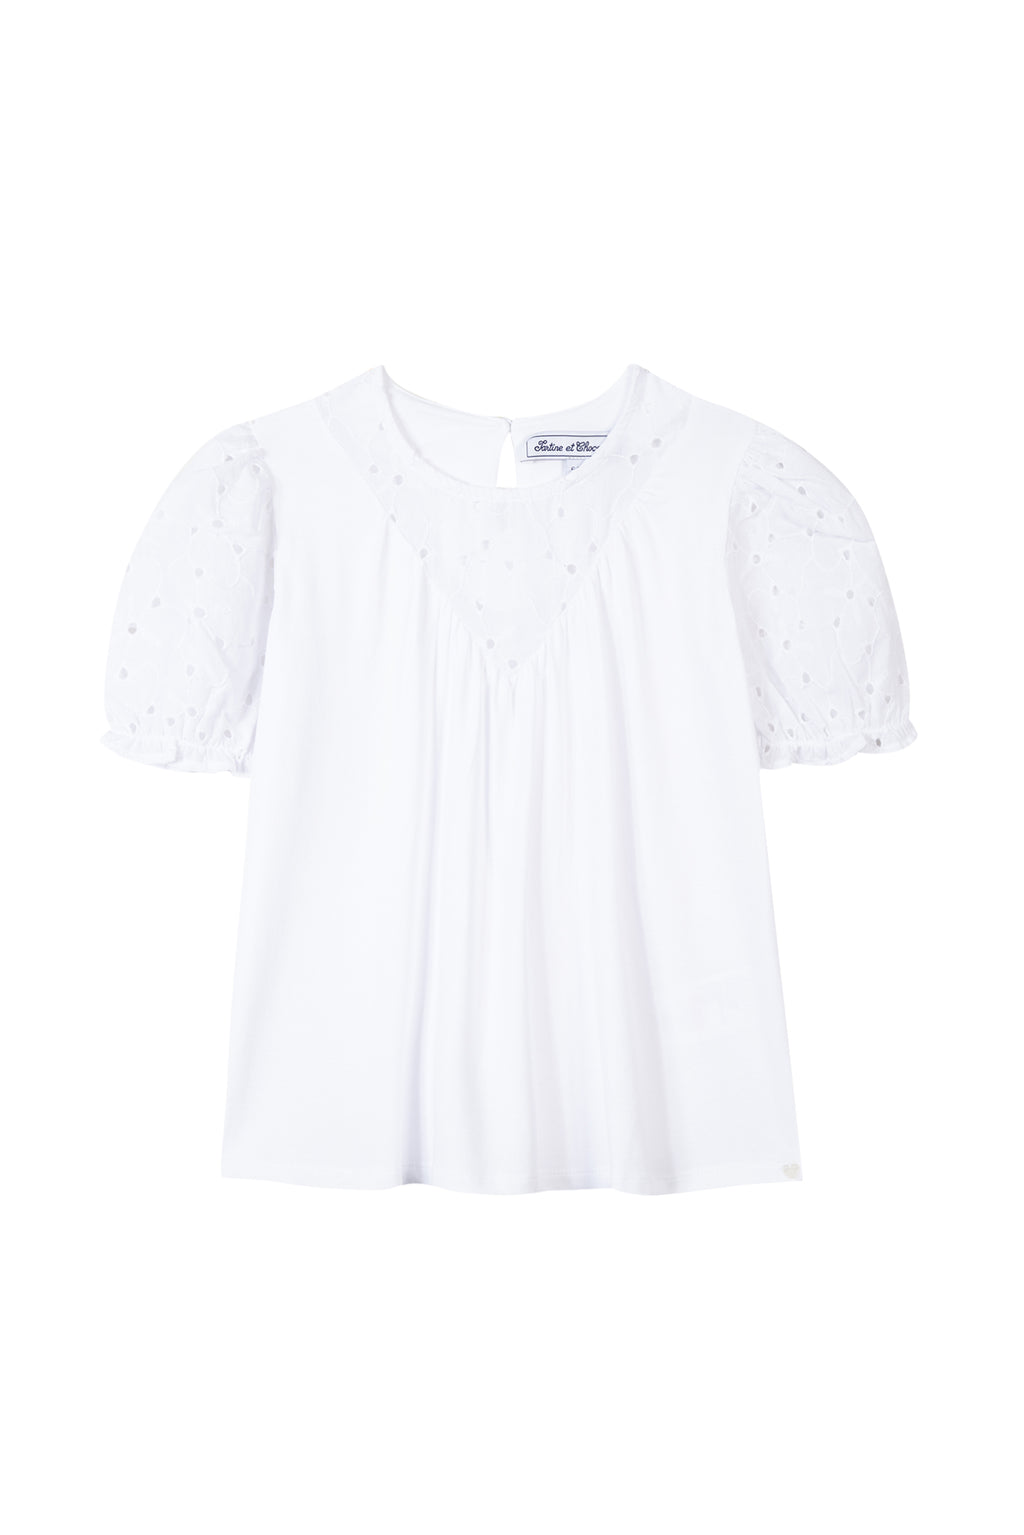 T-shirt - Blanc broderie anglaise